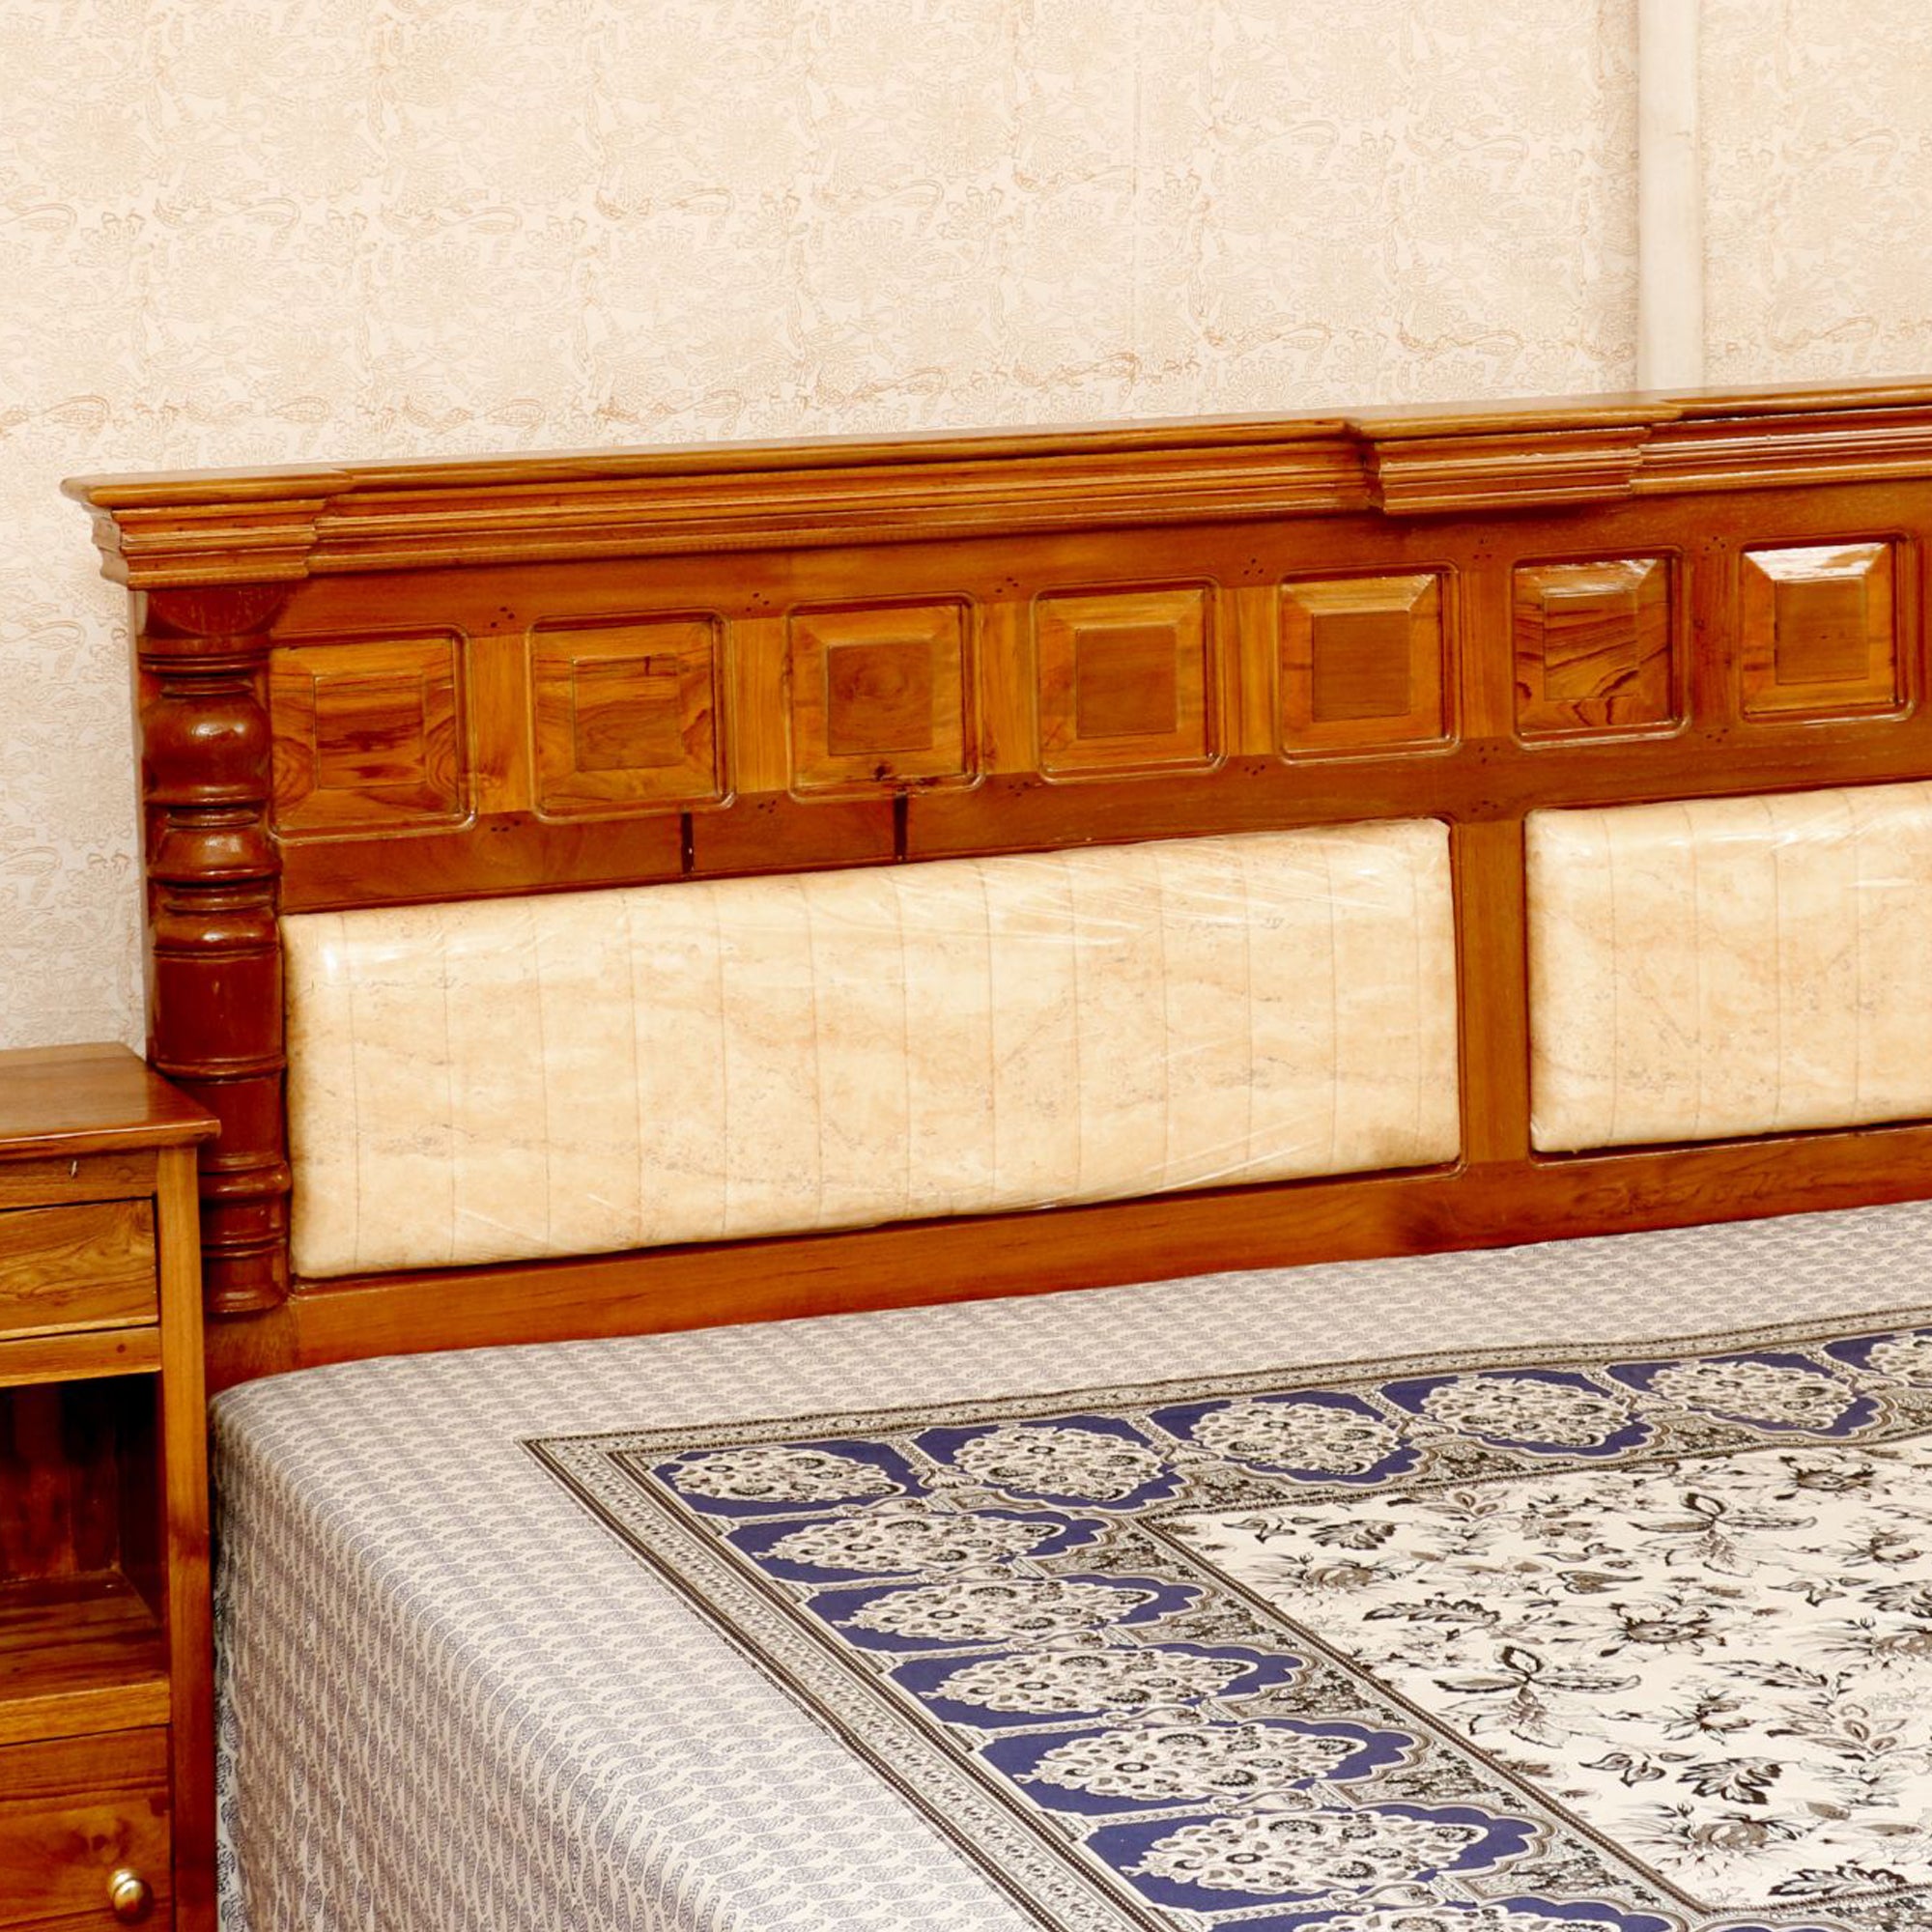 Teak Wood Bed in Light Brown Finish Bed